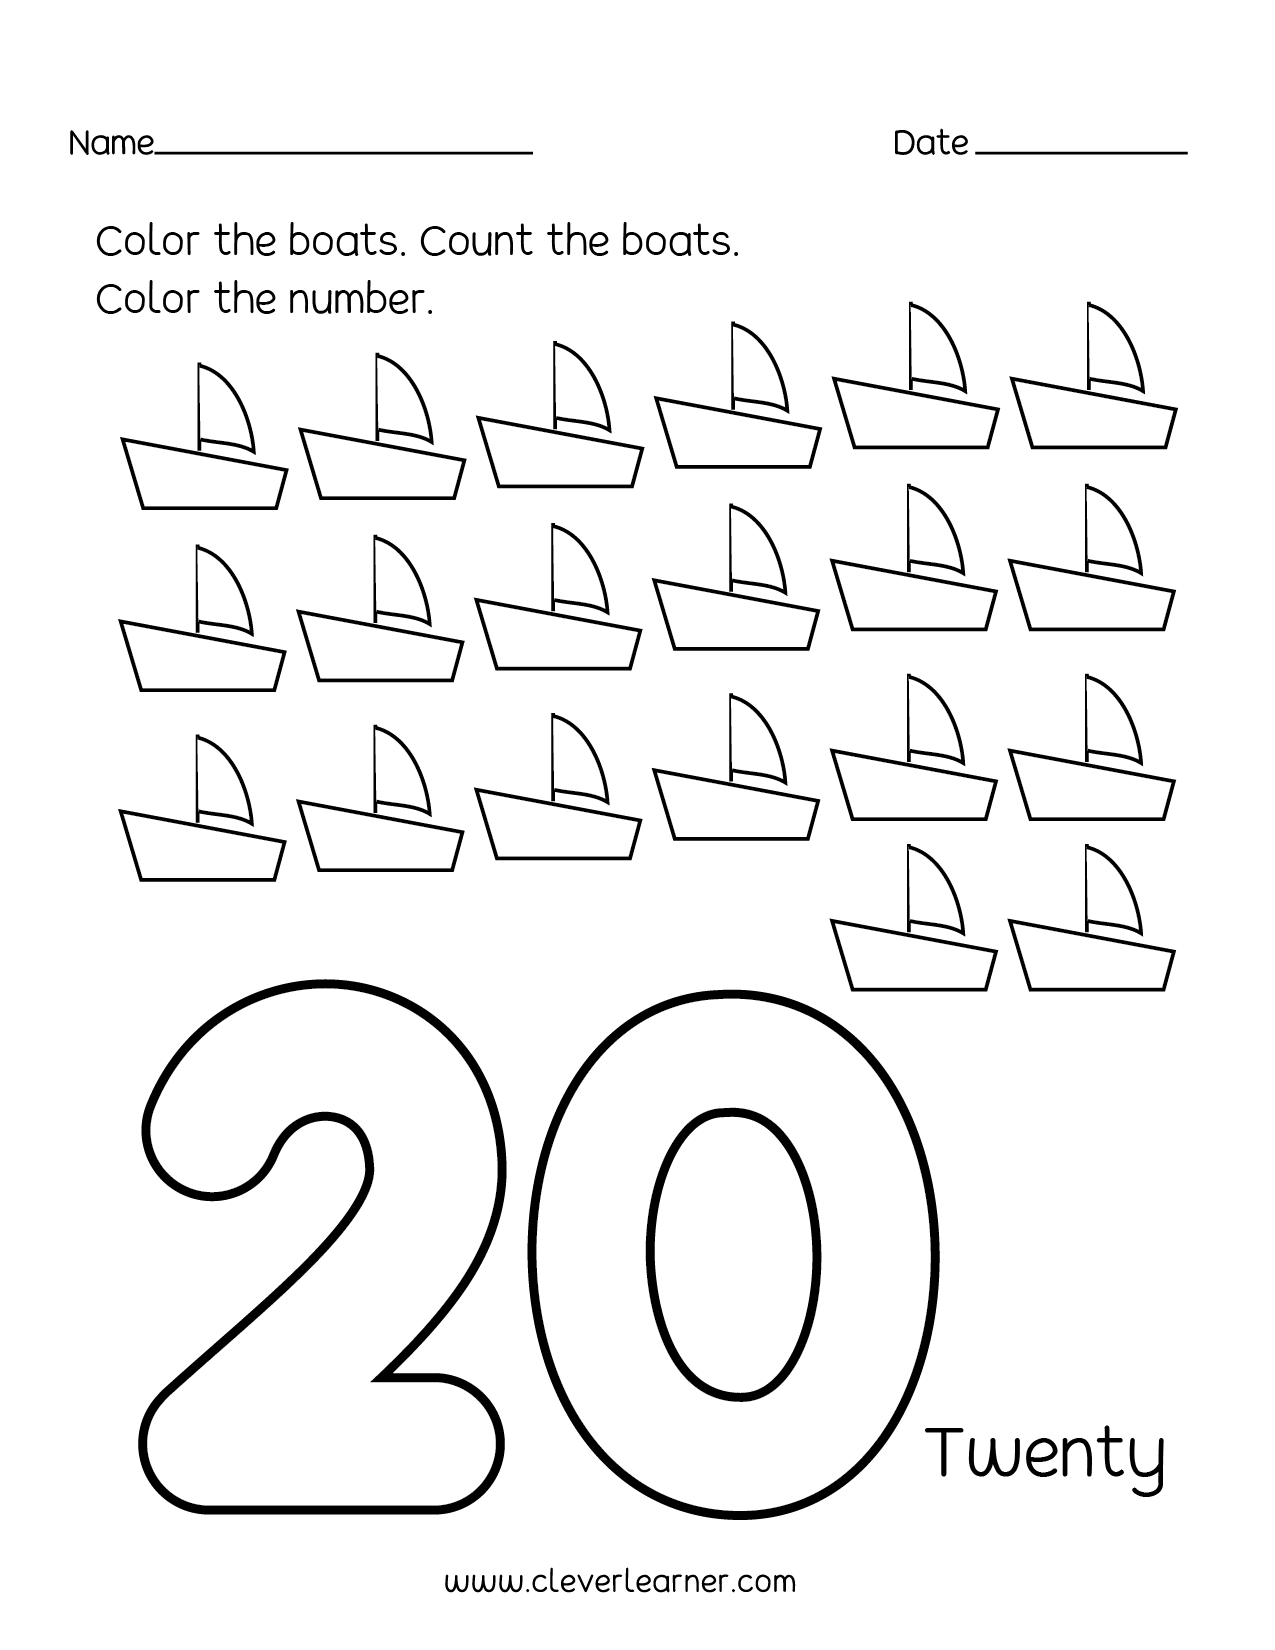 number-20-writing-counting-and-identification-printable-worksheets-for